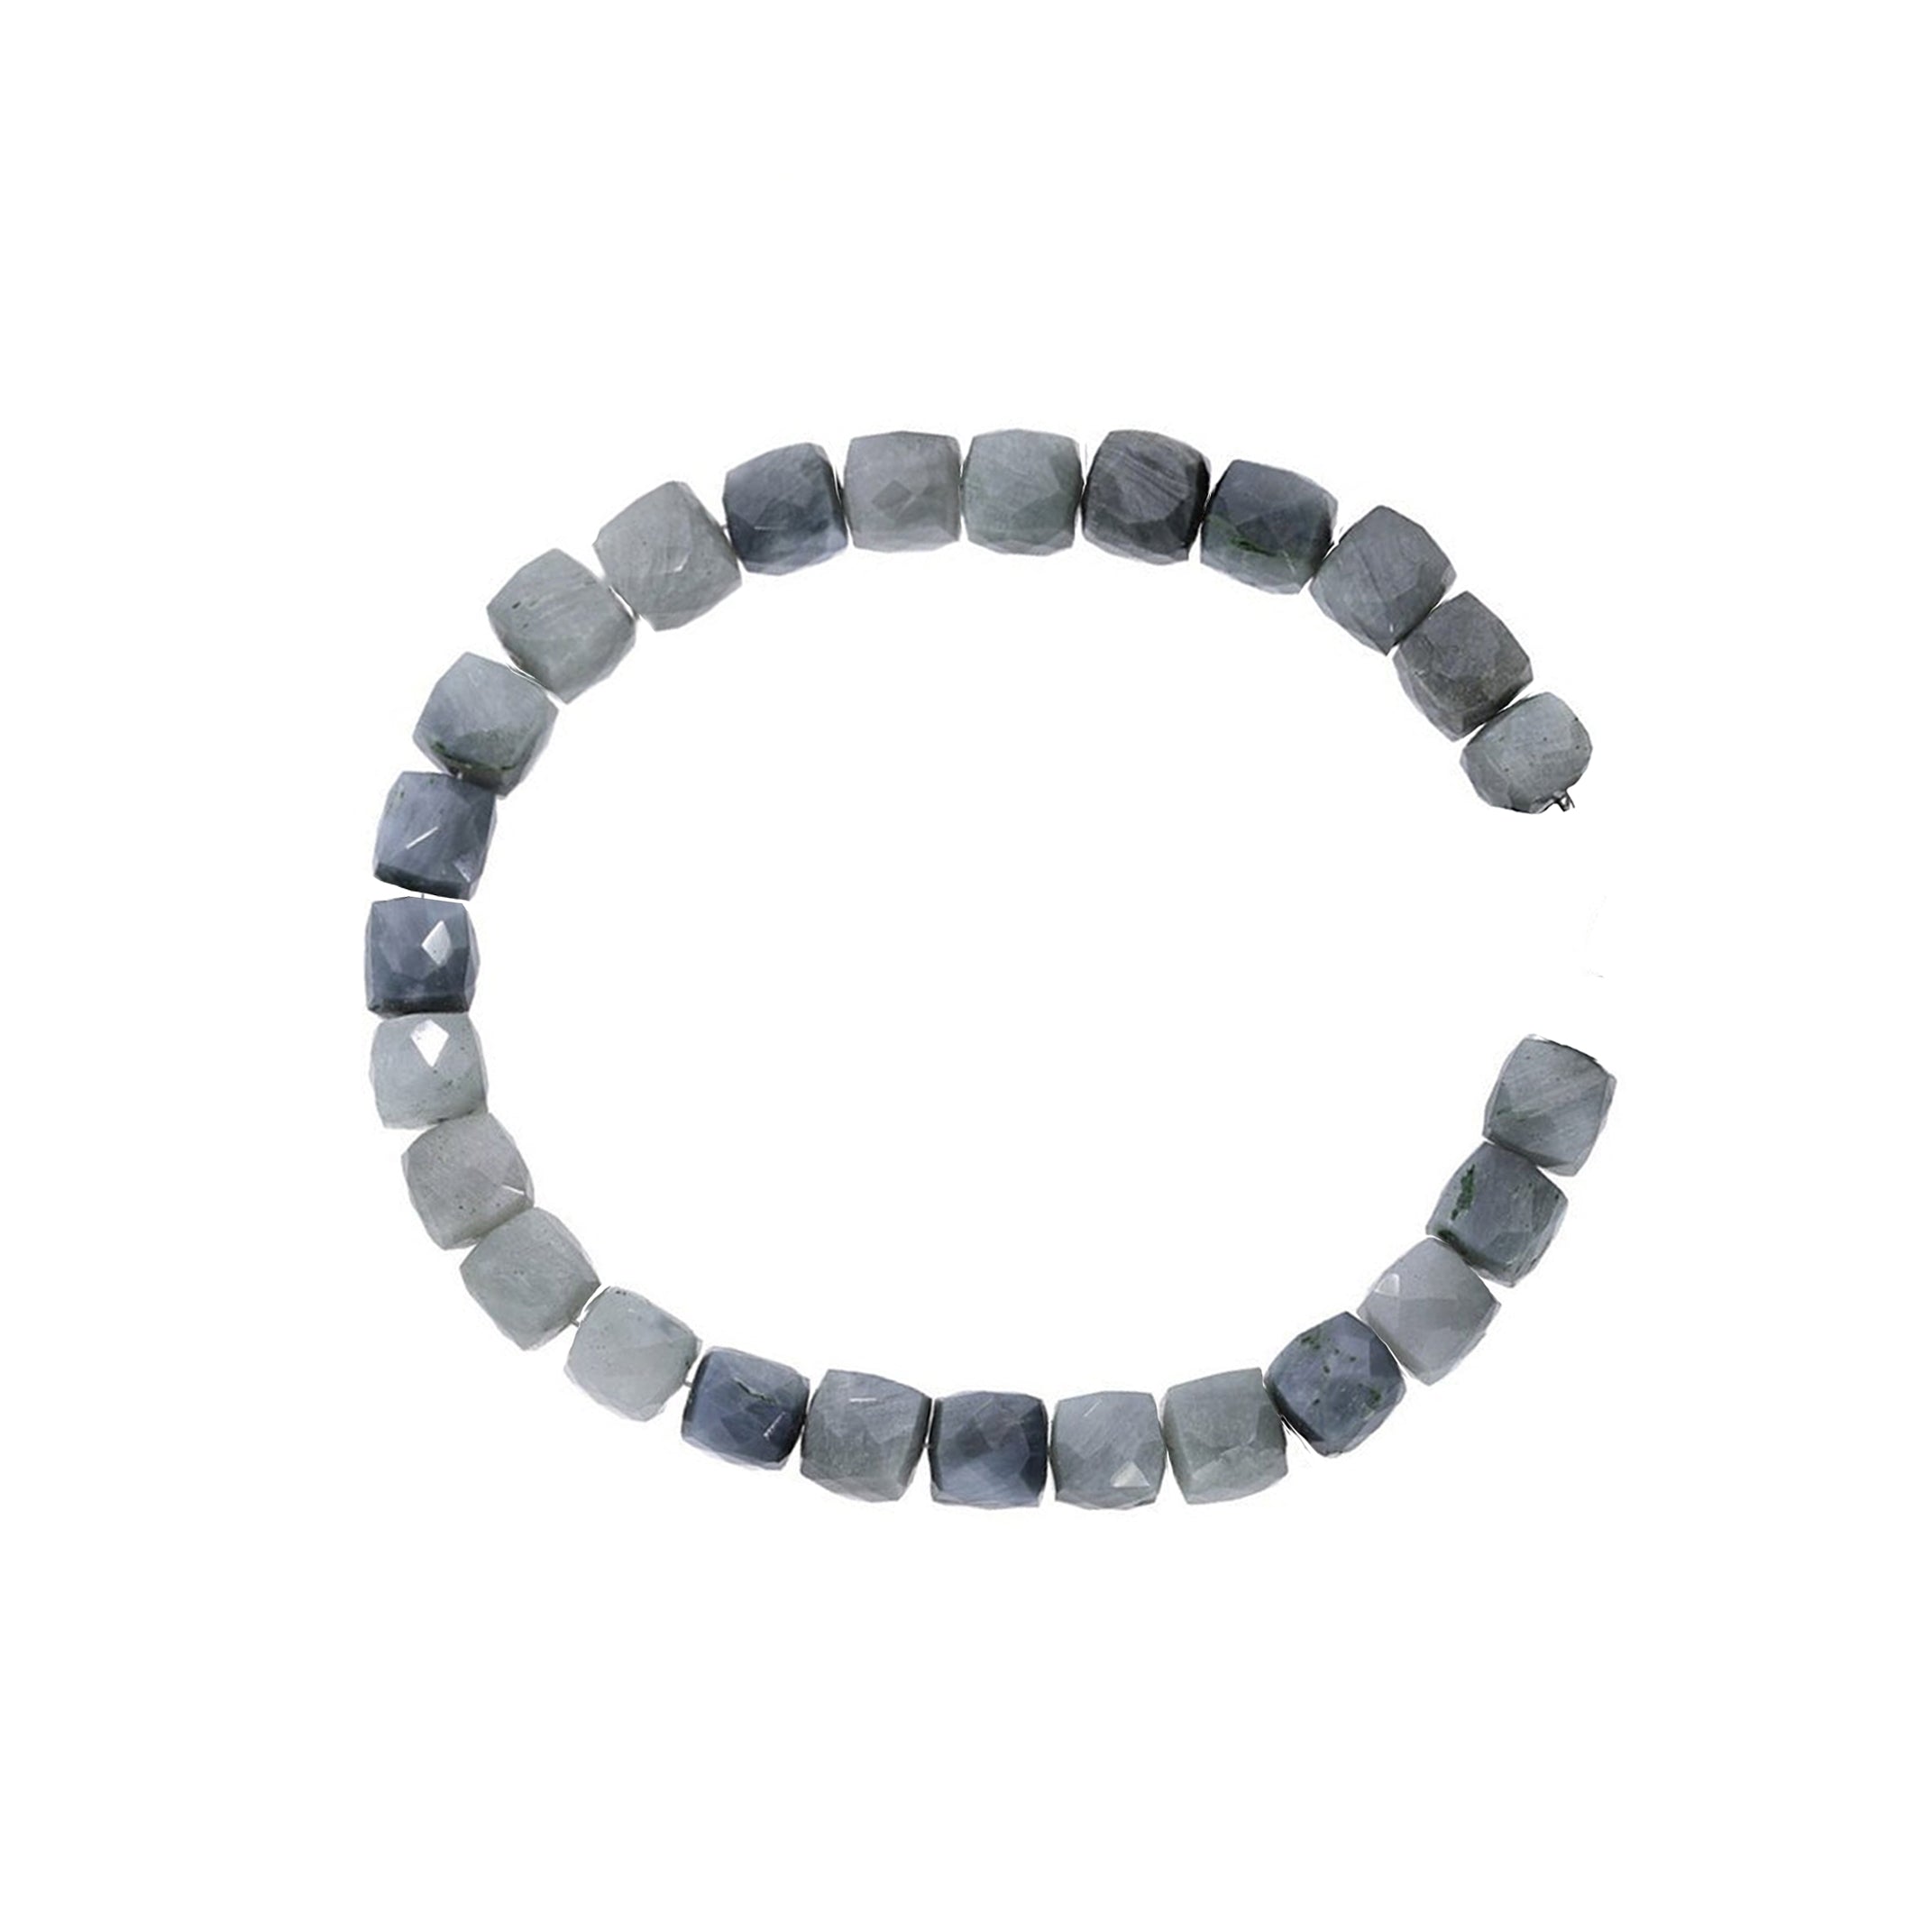 Gray Cats Eye 7 To 8 MM Faceted Cube Shape Beads Strand